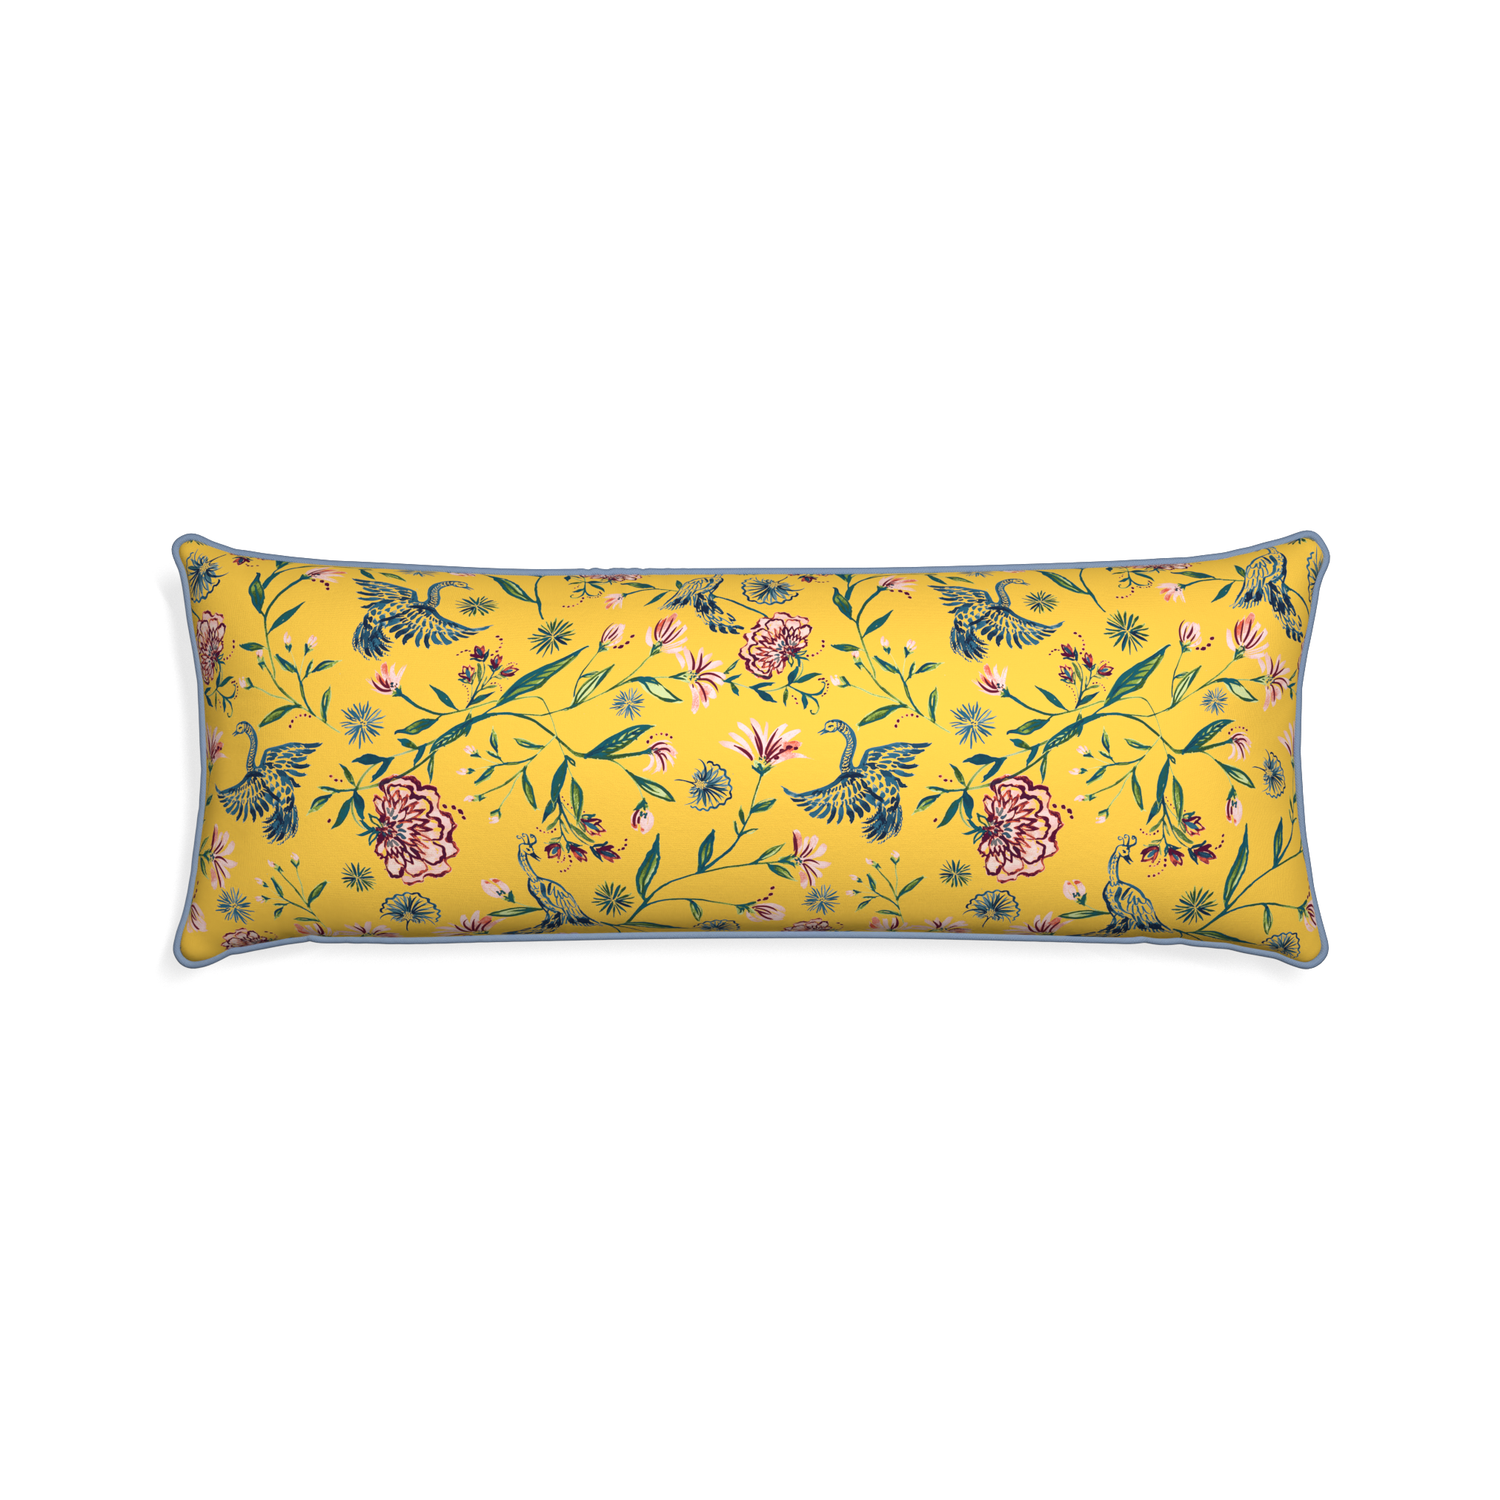 Xl-lumbar daphne canary custom pillow with sky piping on white background